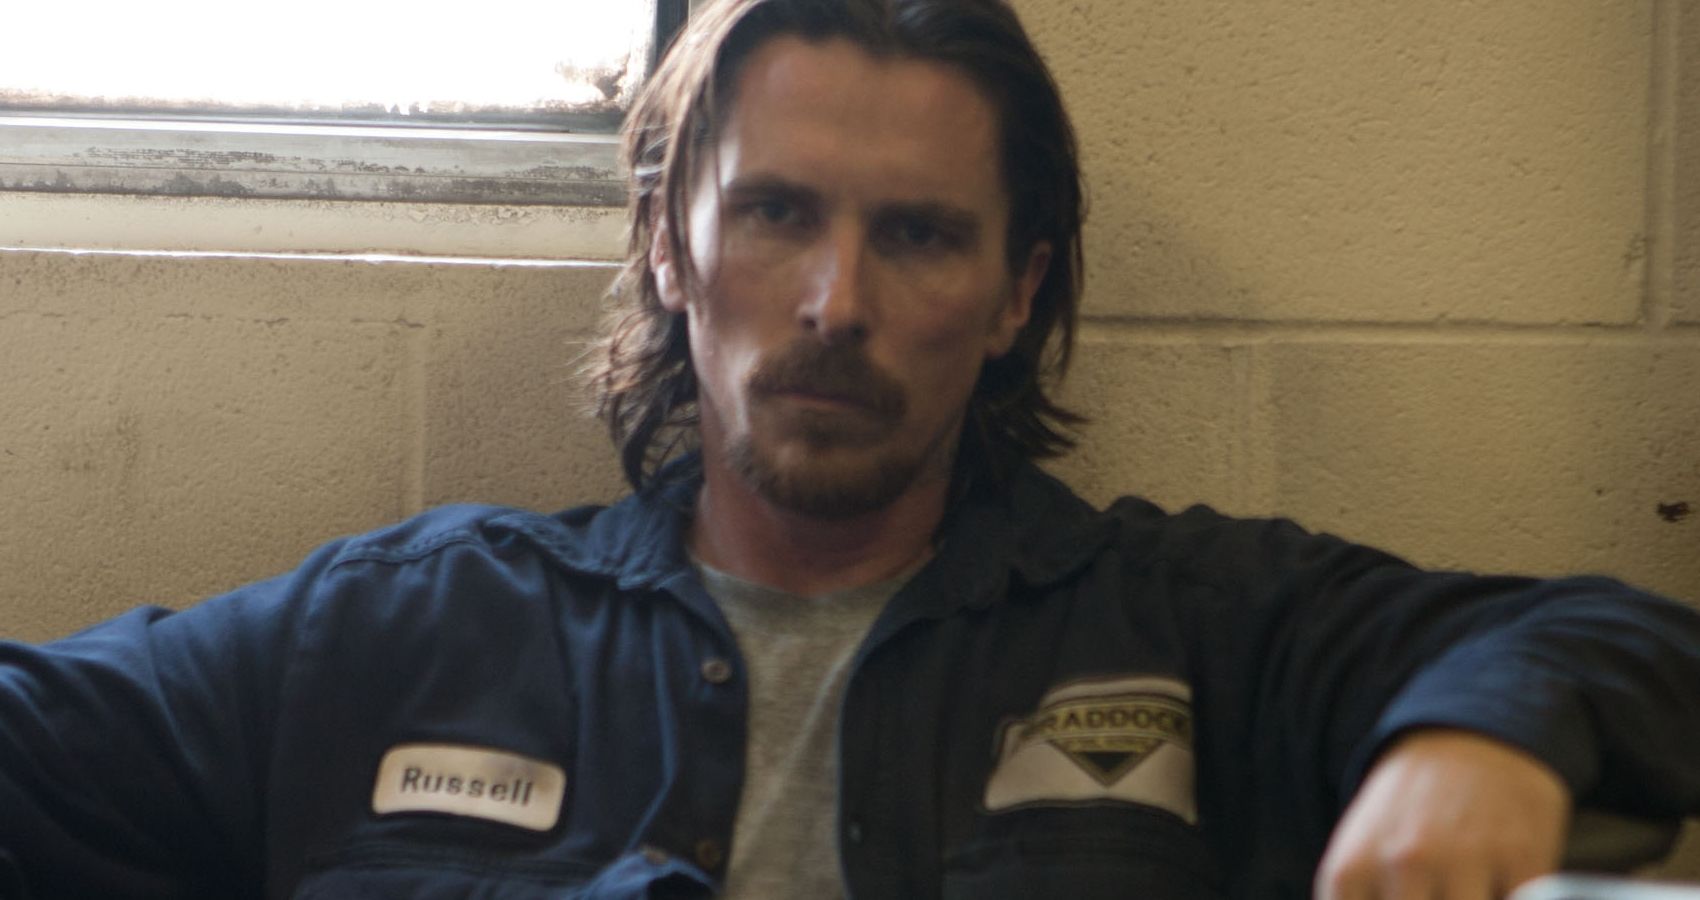 A scenen from Out of the Furnace (2013)